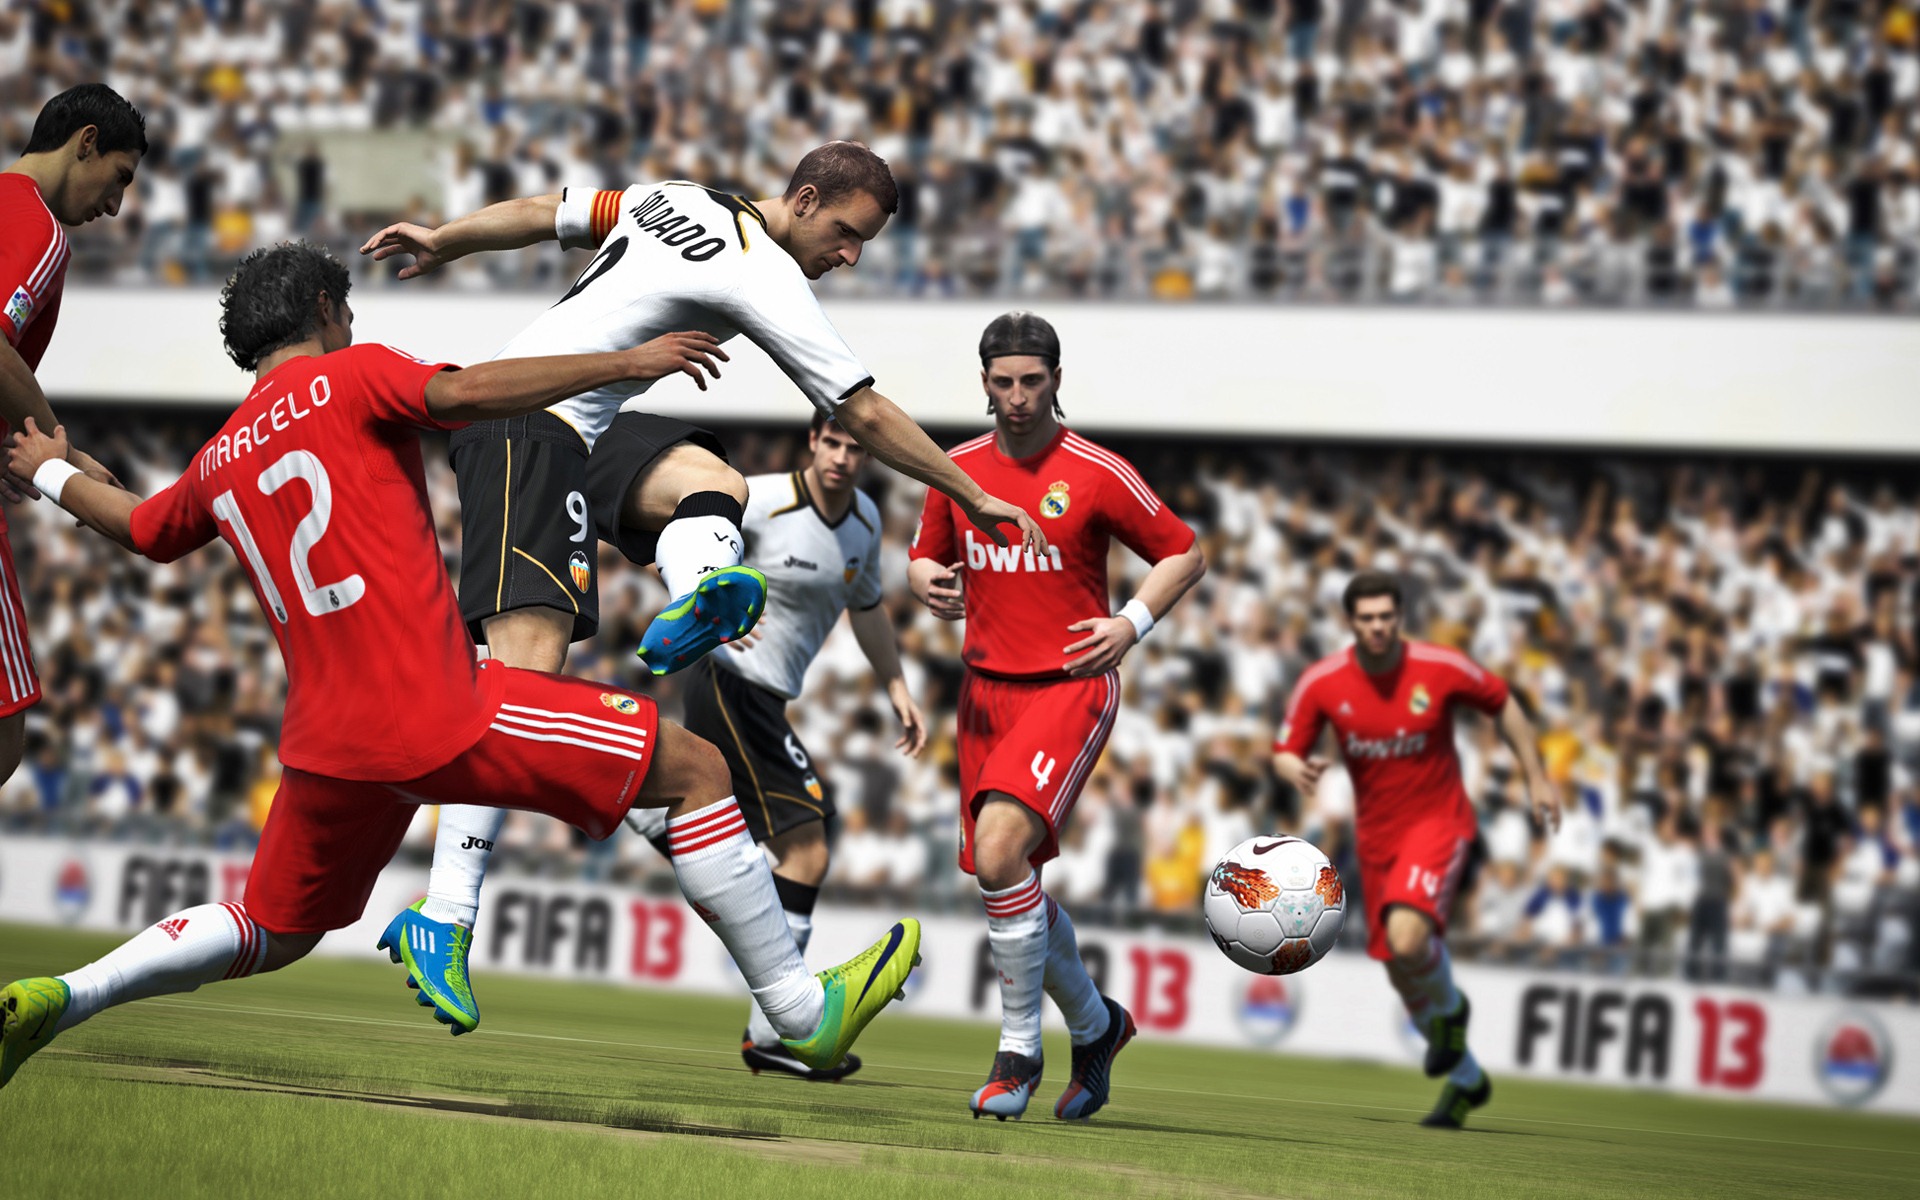 FIFA 13 game HD wallpapers #17 - 1920x1200